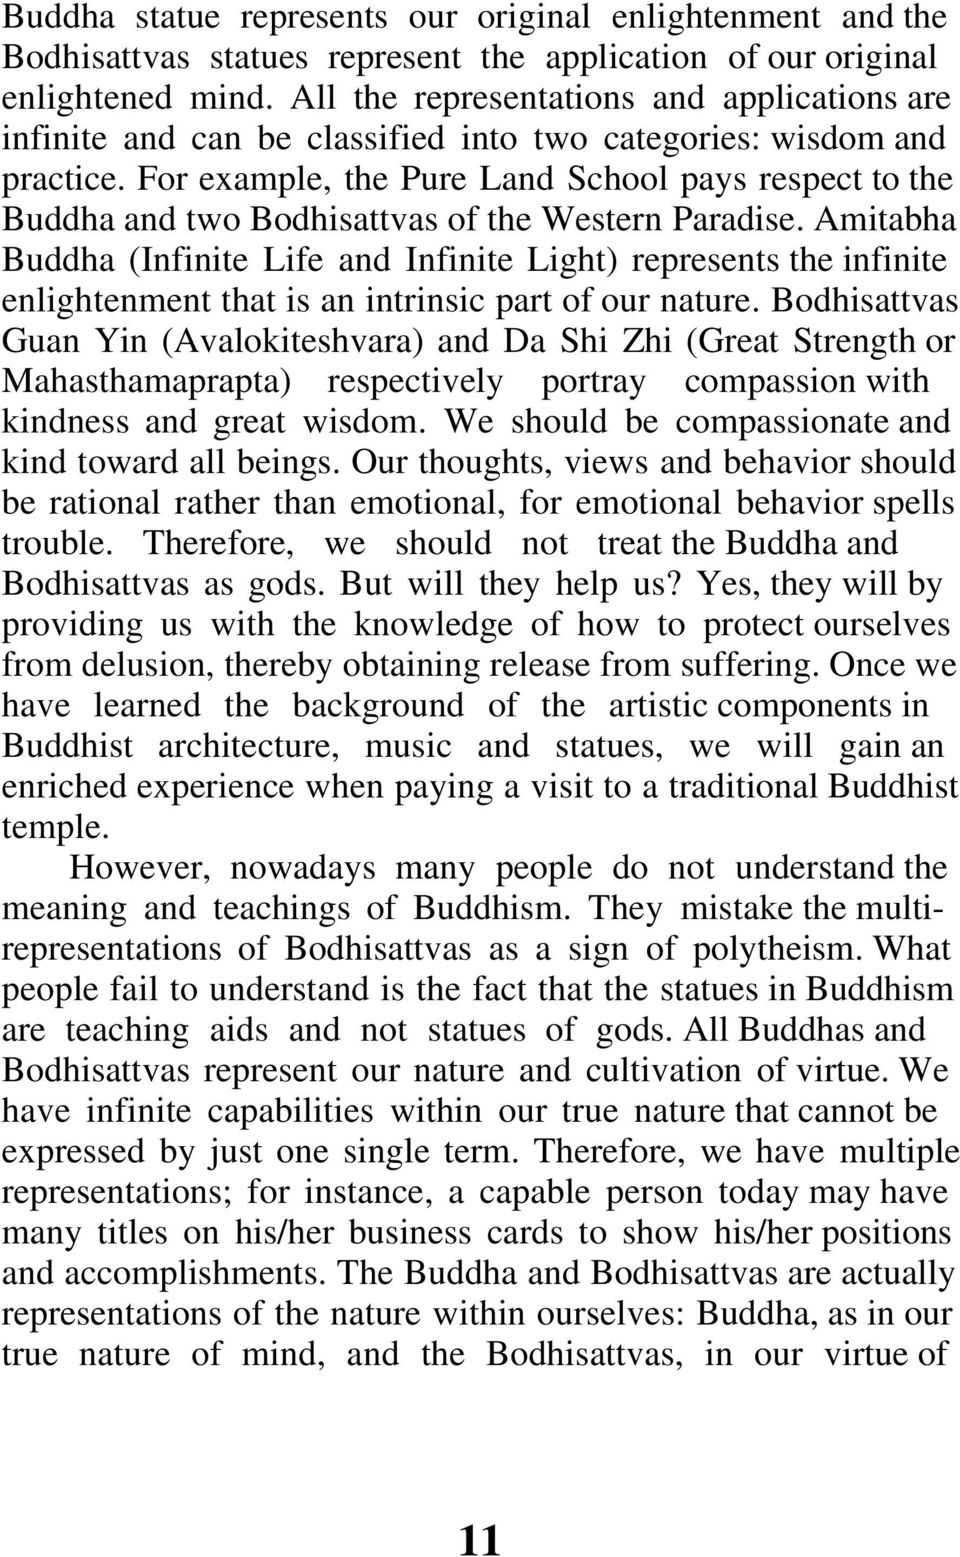 For example, the Pure Land School pays respect to the Buddha and two Bodhisattvas of the Western Paradise.